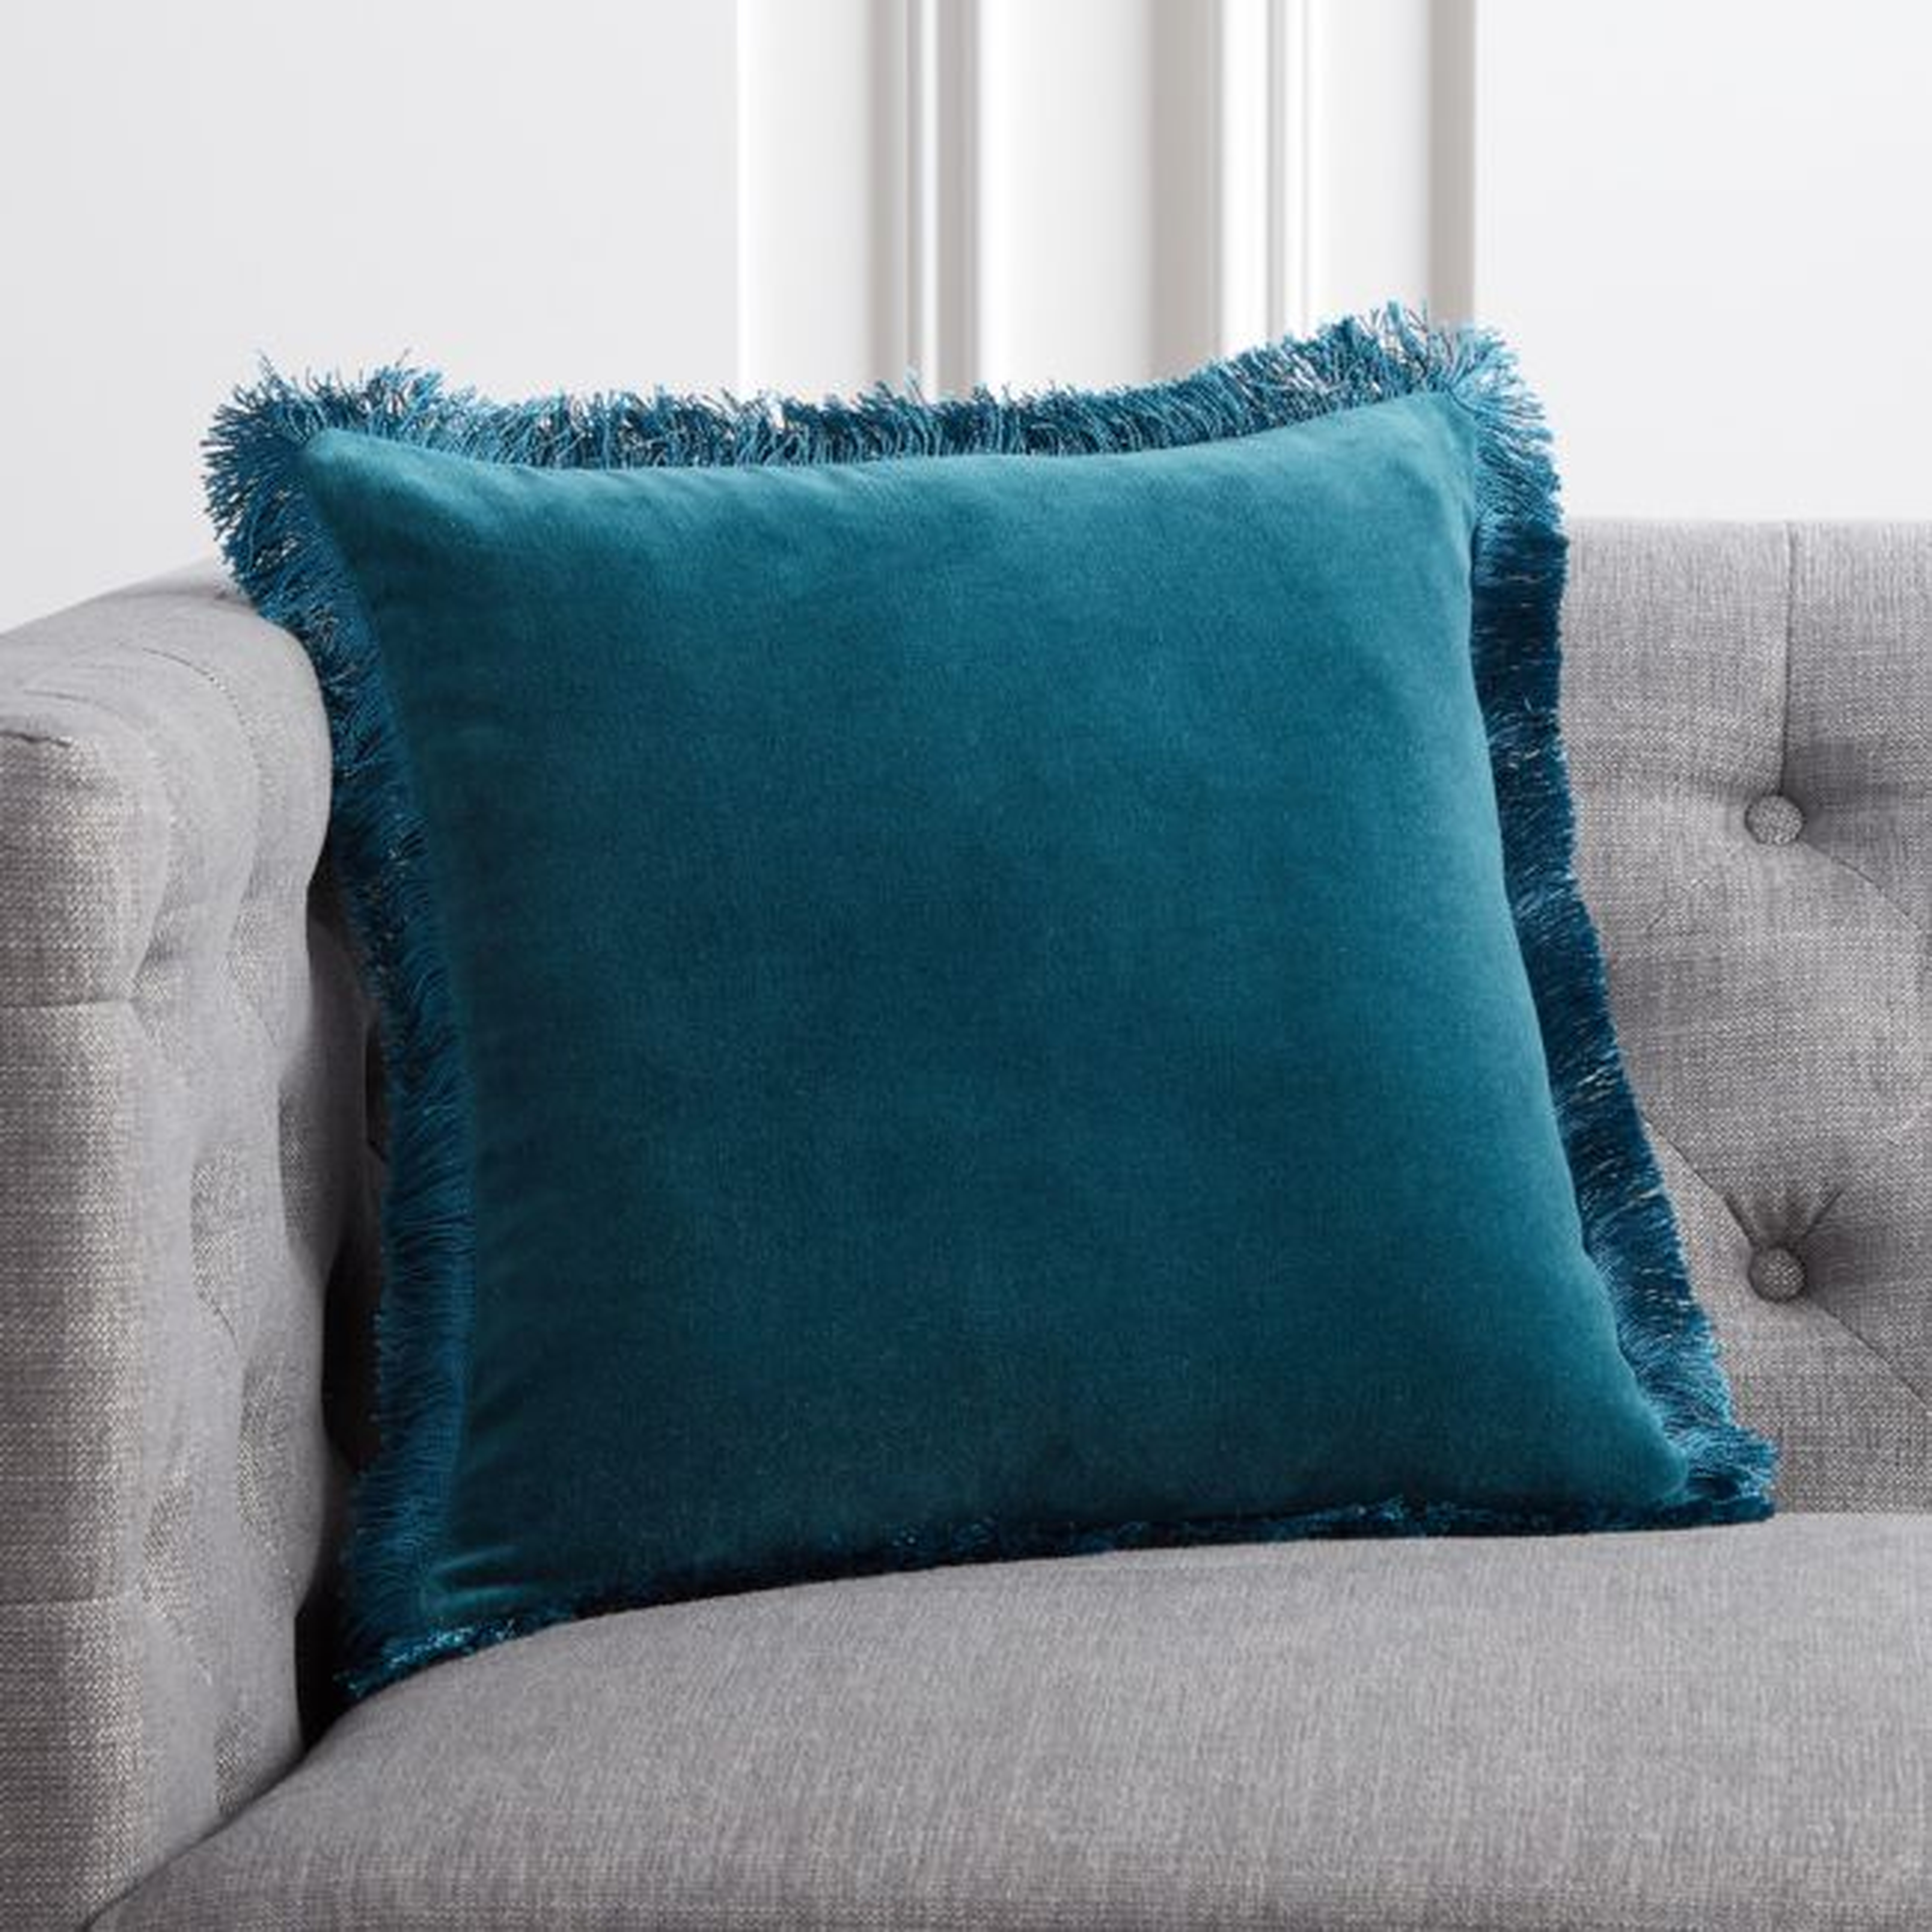 16" Bettie Teal Pillow with Feather-Down Insert - CB2